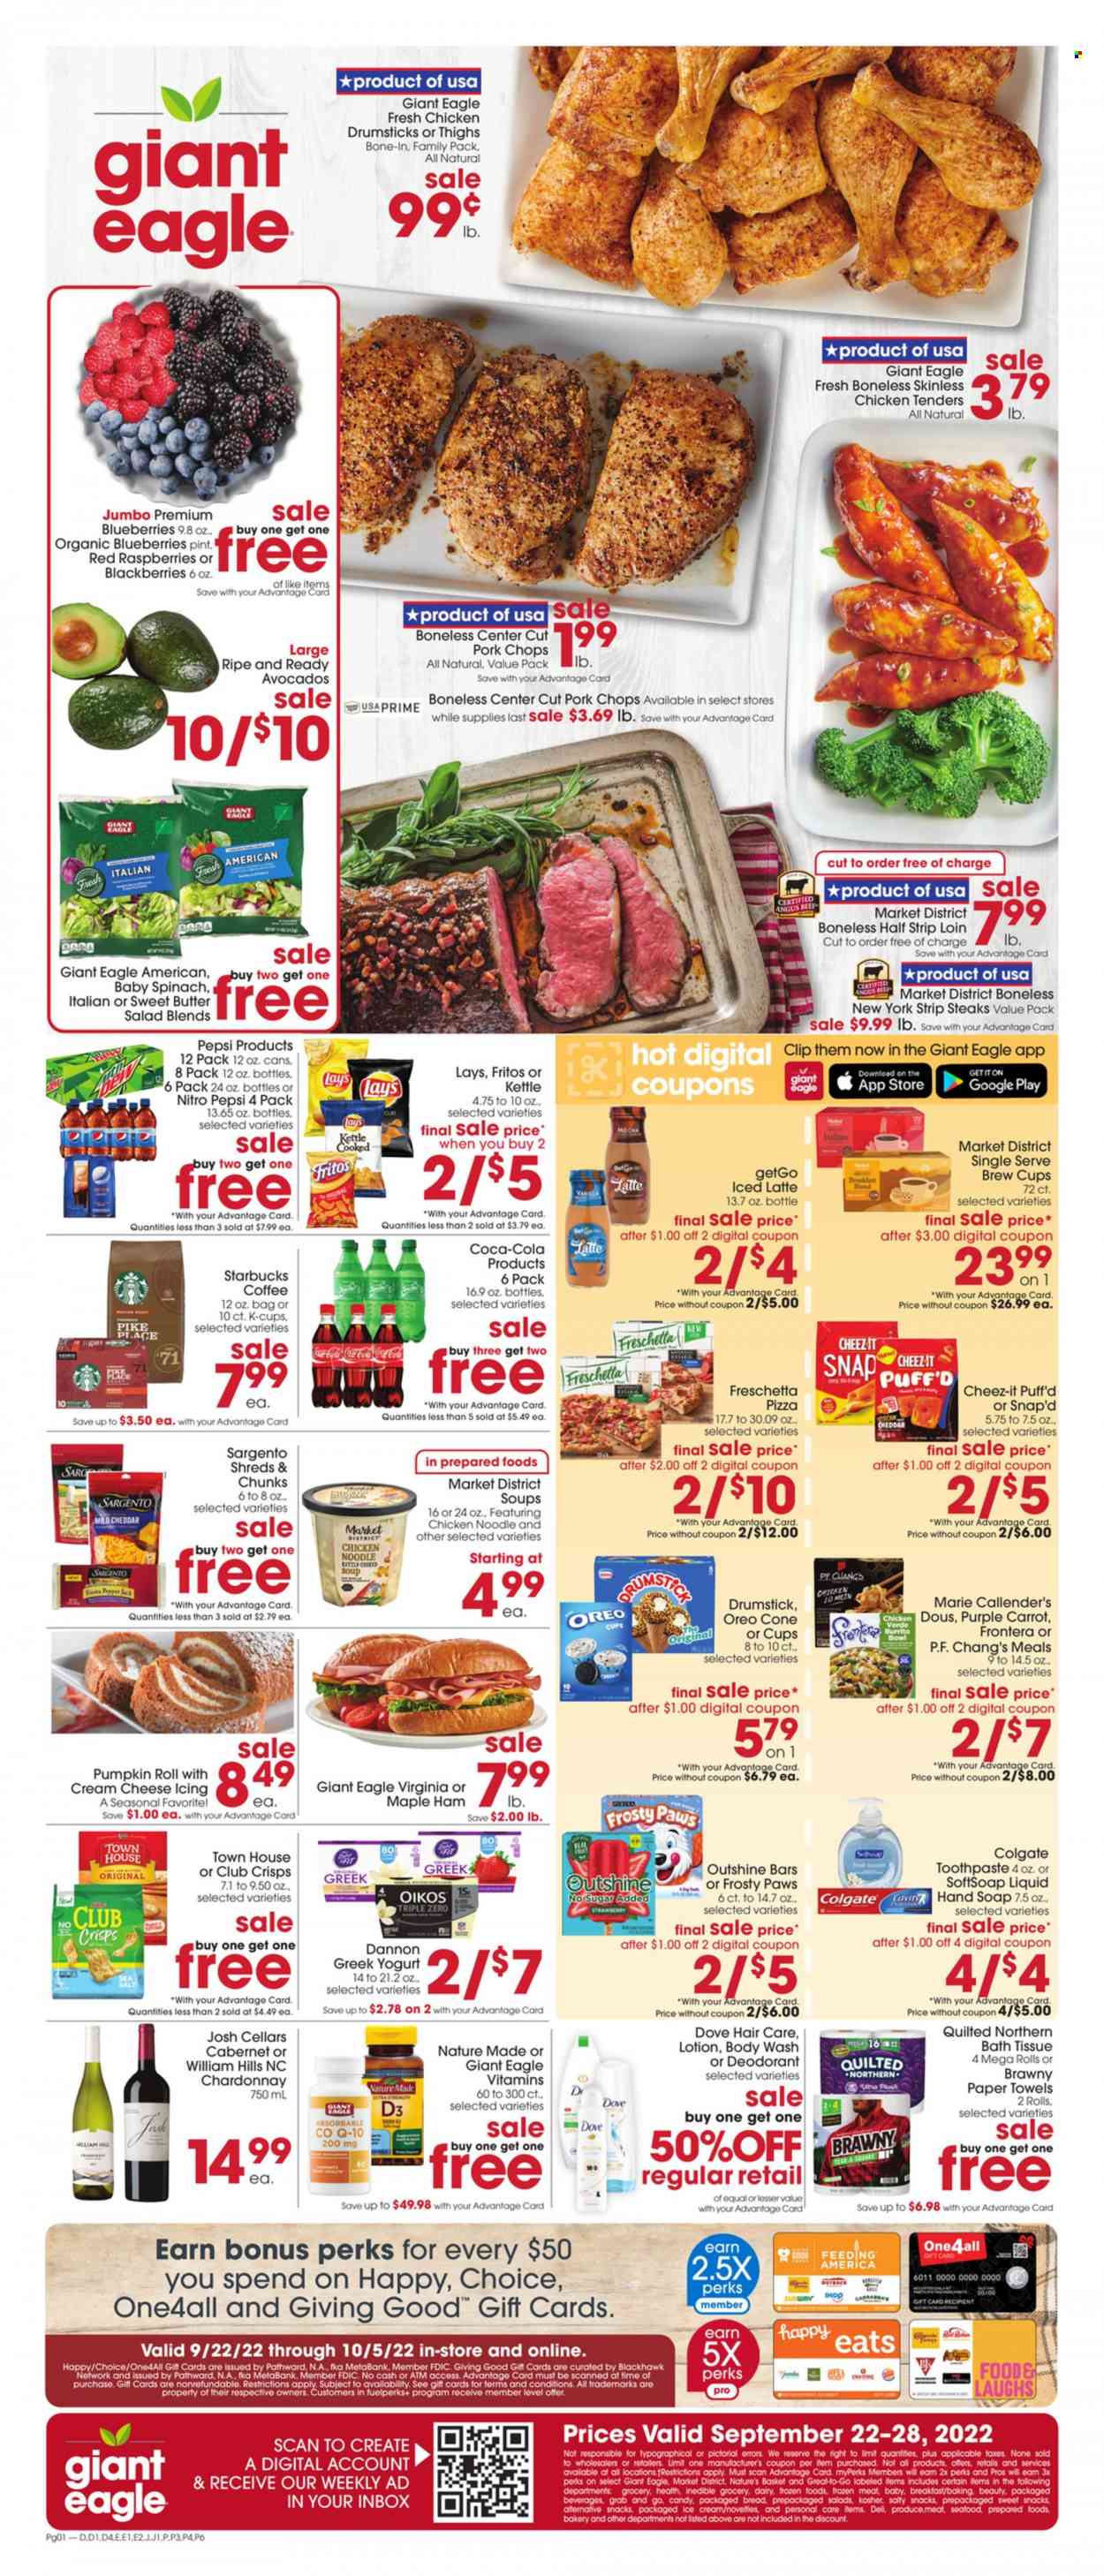 thumbnail - Giant Eagle Flyer - 09/22/2022 - 09/28/2022 - Sales products - pumpkin, salad, blueberries, seafood, pizza, chicken tenders, soup, burrito, noodles, Marie Callender's, Pepper Jack cheese, Sargento, greek yoghurt, Oreo, yoghurt, Oikos, Dannon, butter, ice cream, Dove, snack, Fritos, Lay’s, Cheez-It, Coca-Cola, Pepsi, coffee, Starbucks, coffee capsules, K-Cups, breakfast blend, Cabernet Sauvignon, white wine, Chardonnay, wine, chicken drumsticks, beef meat, steak, striploin steak, pork chops, pork meat, bath tissue, Quilted Northern, kitchen towels, paper towels, body wash, Softsoap, hand soap, soap, Colgate, toothpaste, body lotion, anti-perspirant, deodorant, bowl, Paws, Purina, Hill's, Nature Made, vitamin D3. Page 1.